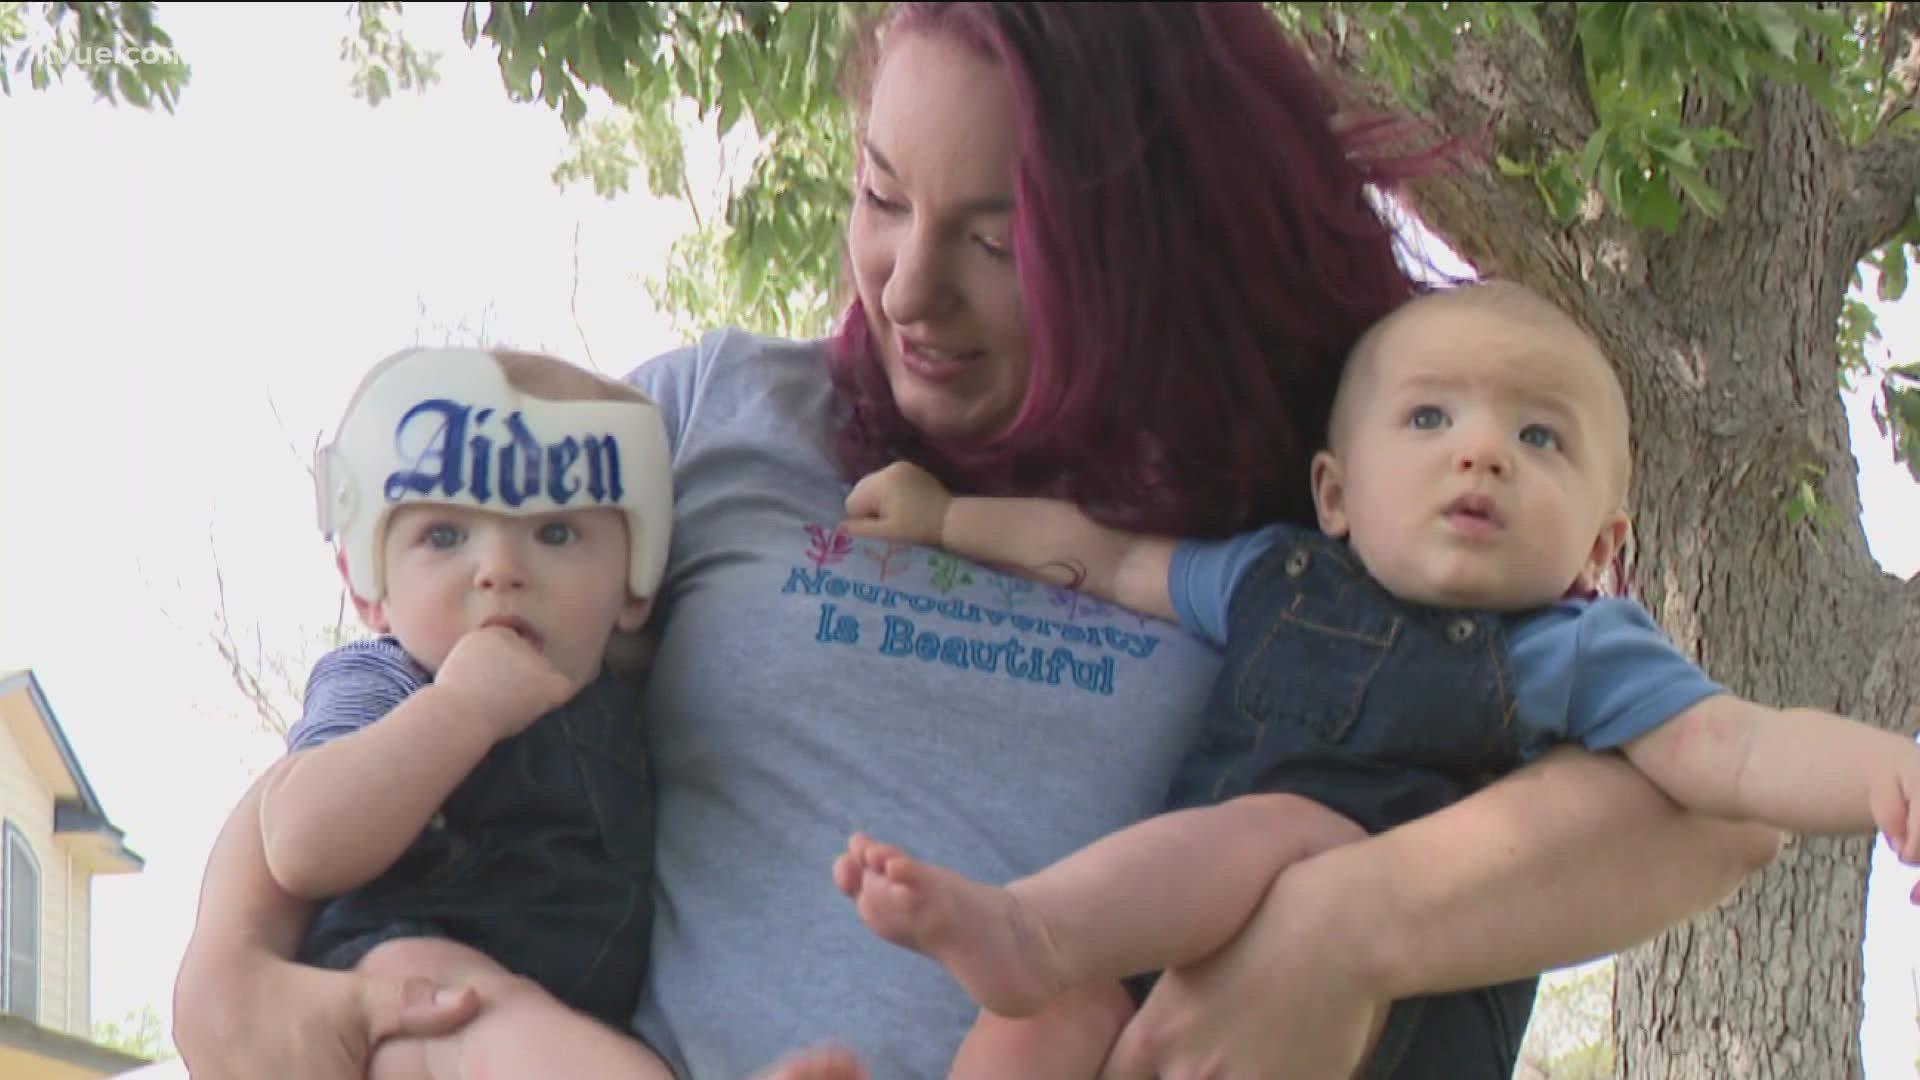 Mother of twins in Cedar Park says she calls multiple stores, drives an hour to get few cans.